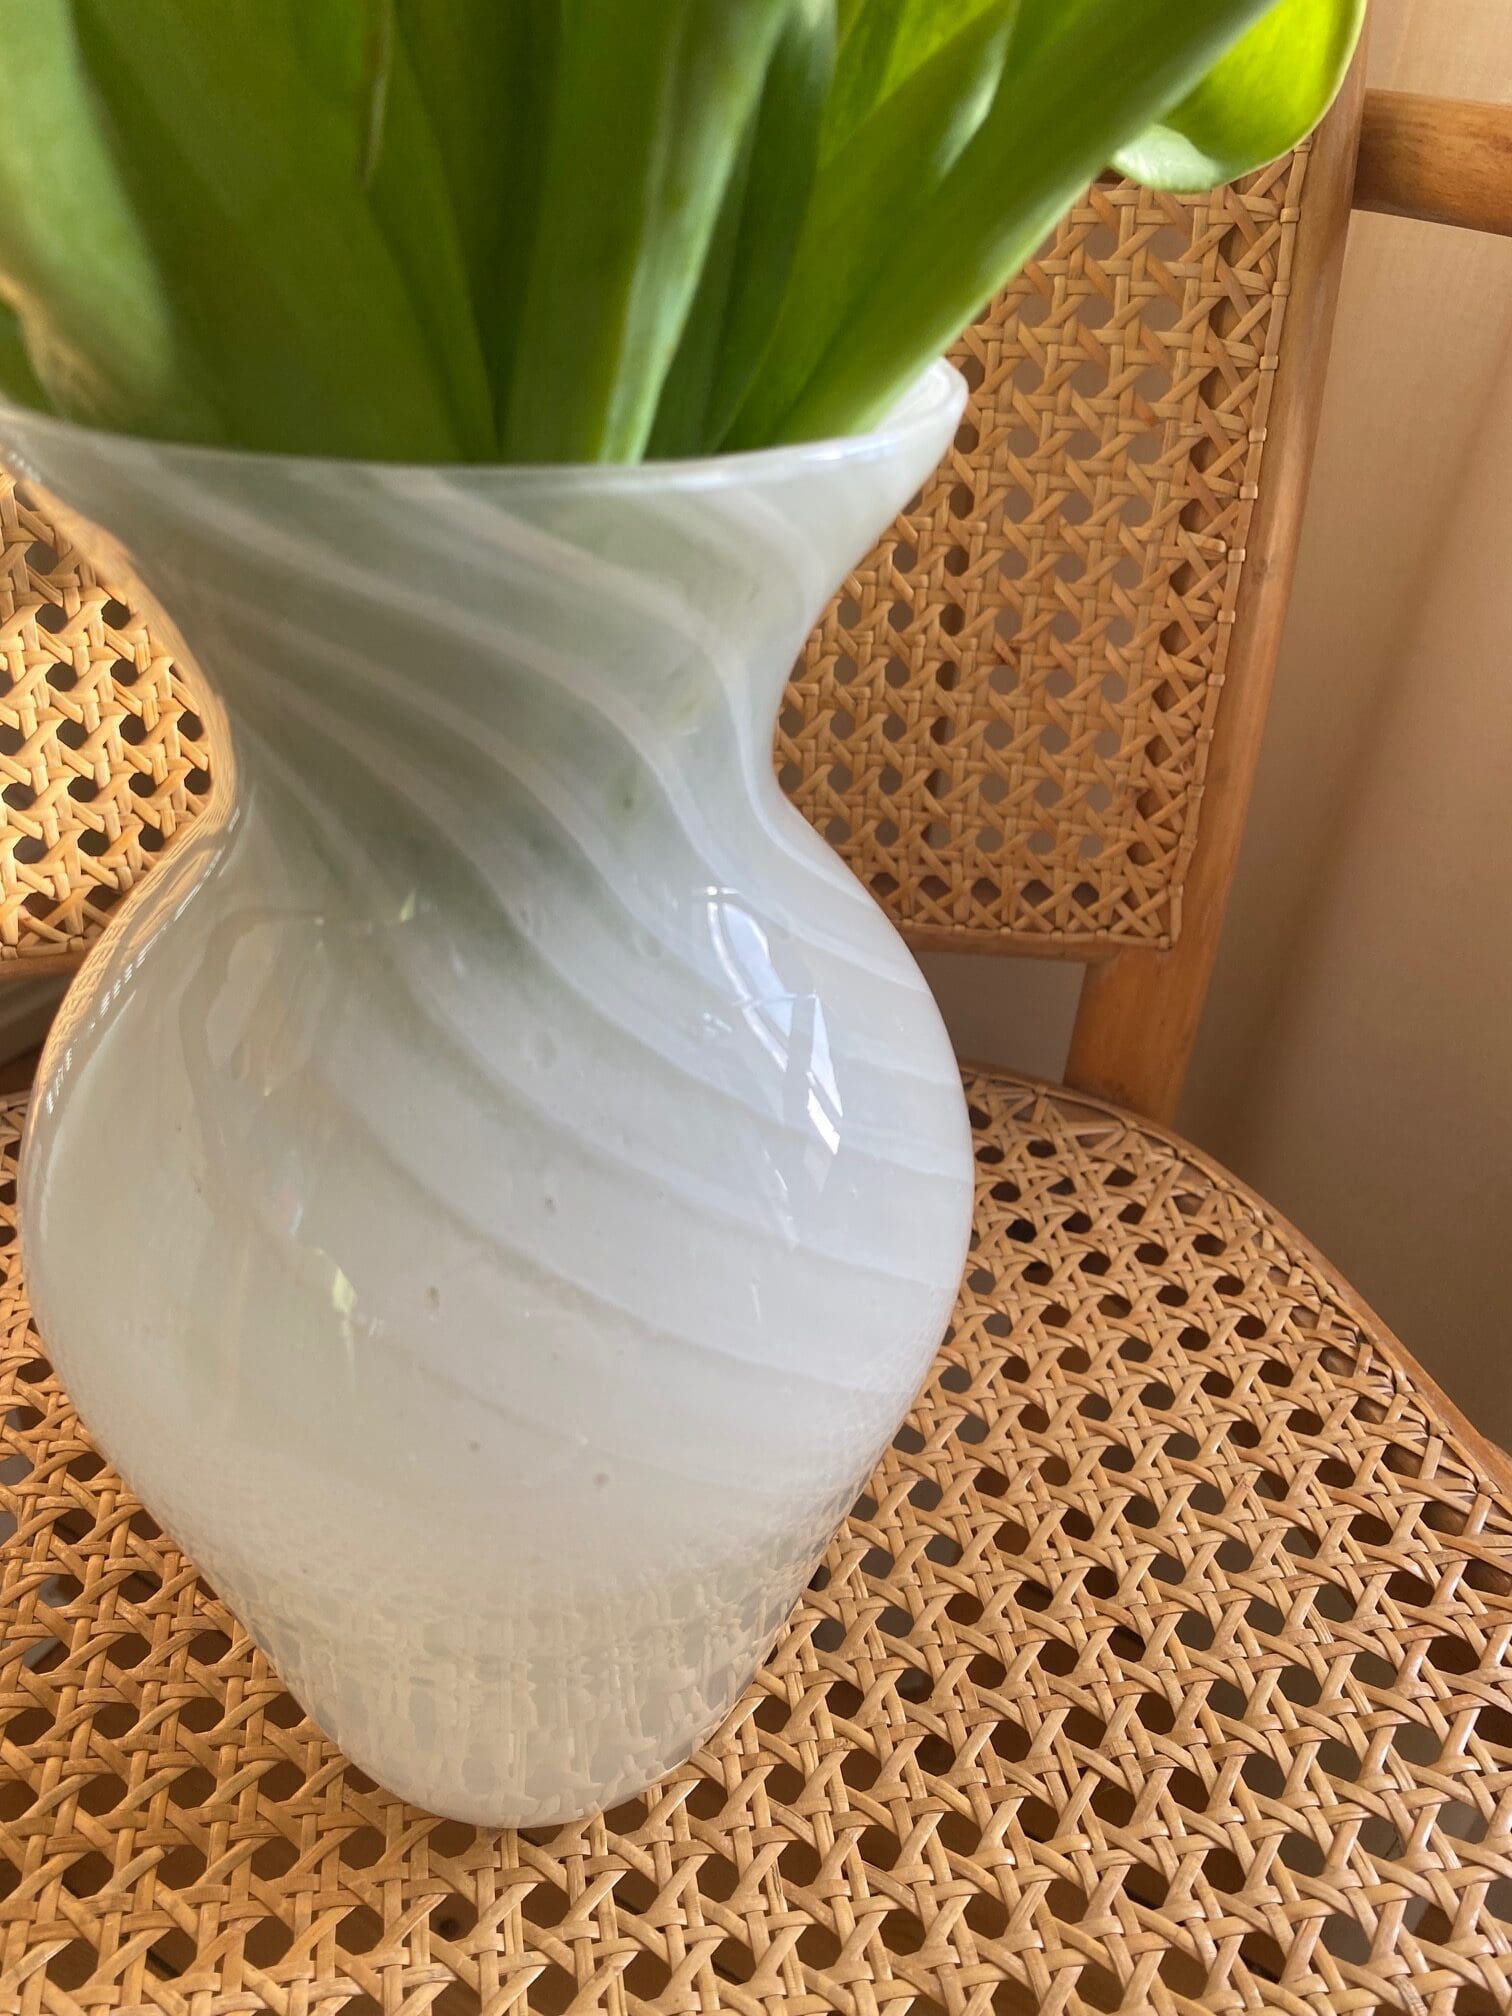 Goal: HeightVintage murano vase white with swirl 36 cm Condition: Beautiful condition, no rejections or scratches. Material: Mouth blown Murano crystal glass